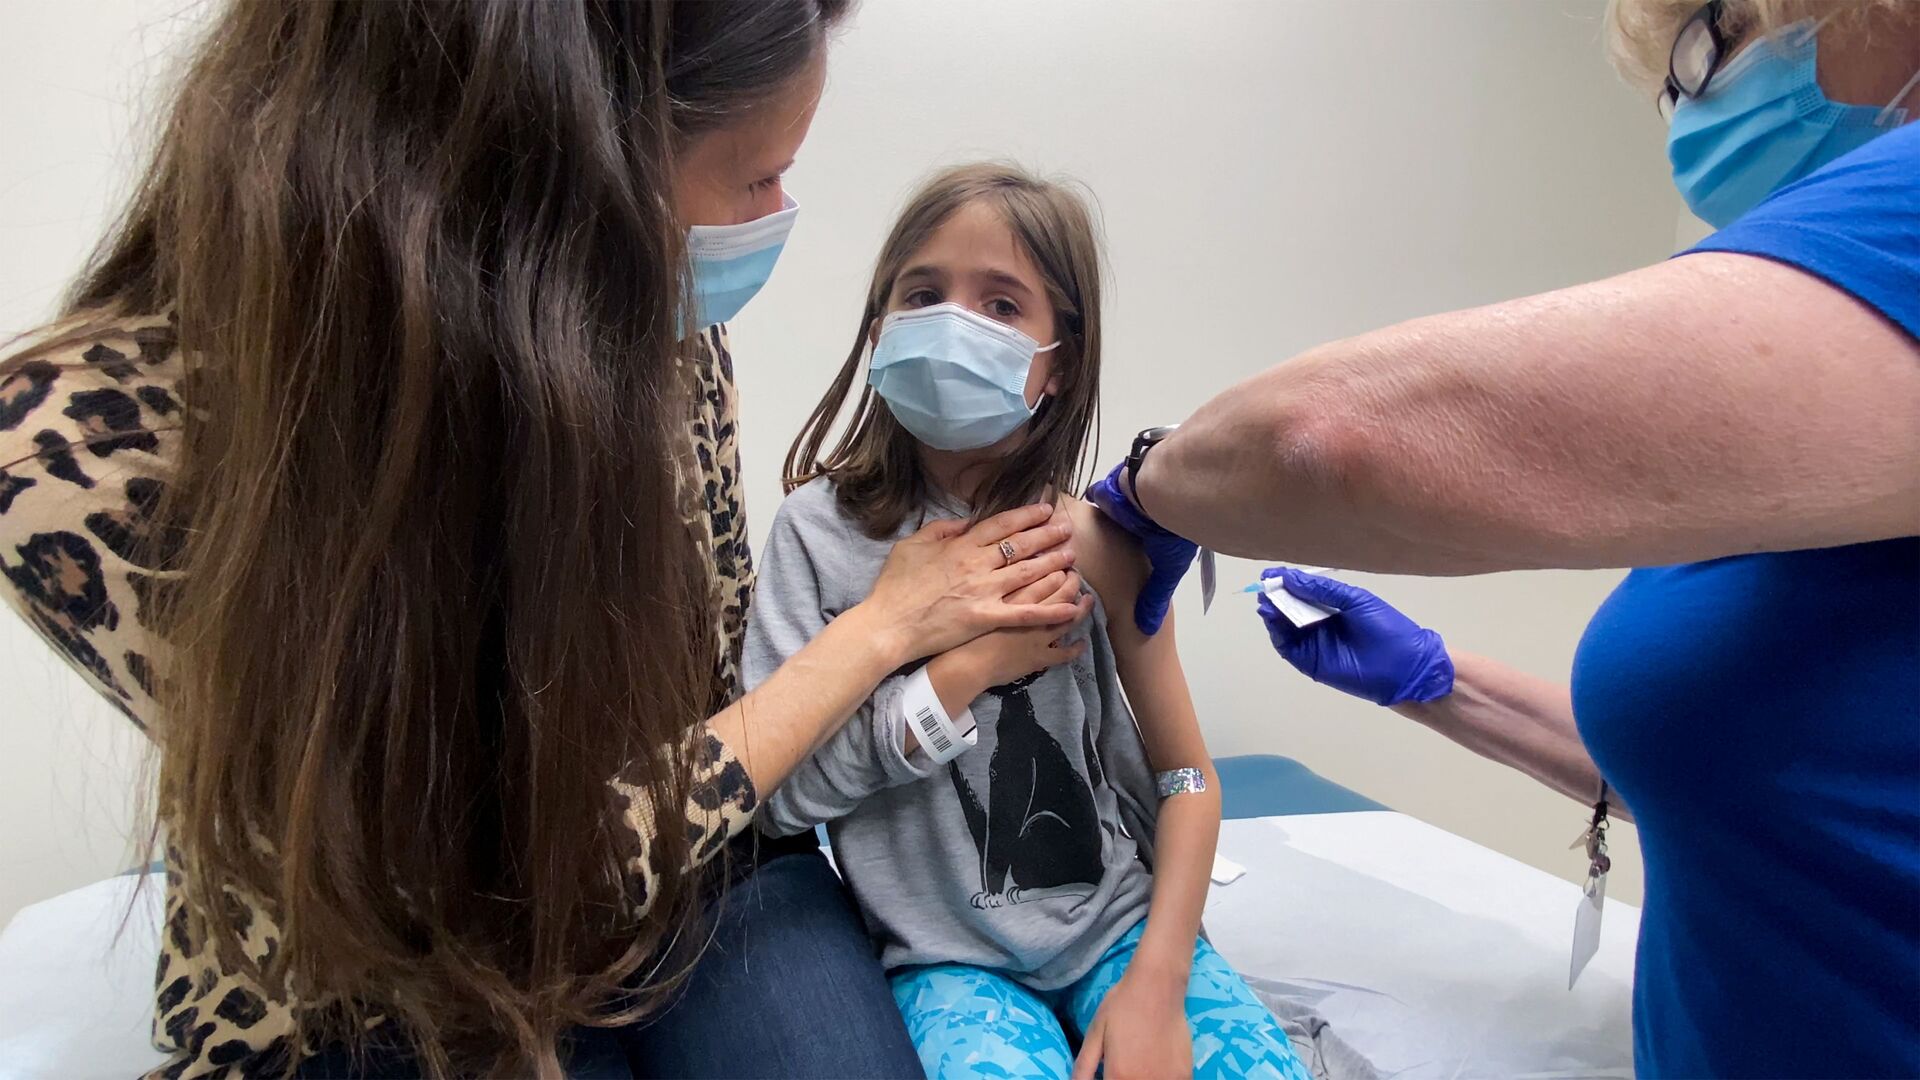 Marisol Gerardo, 9, is held by her mother as she gets the second dose of the Pfizer coronavirus disease (COVID-19) vaccine during a clinical trial for children at Duke Health in Durham, North Carolina, U.S., April 12, 2021. - Sputnik International, 1920, 27.09.2021